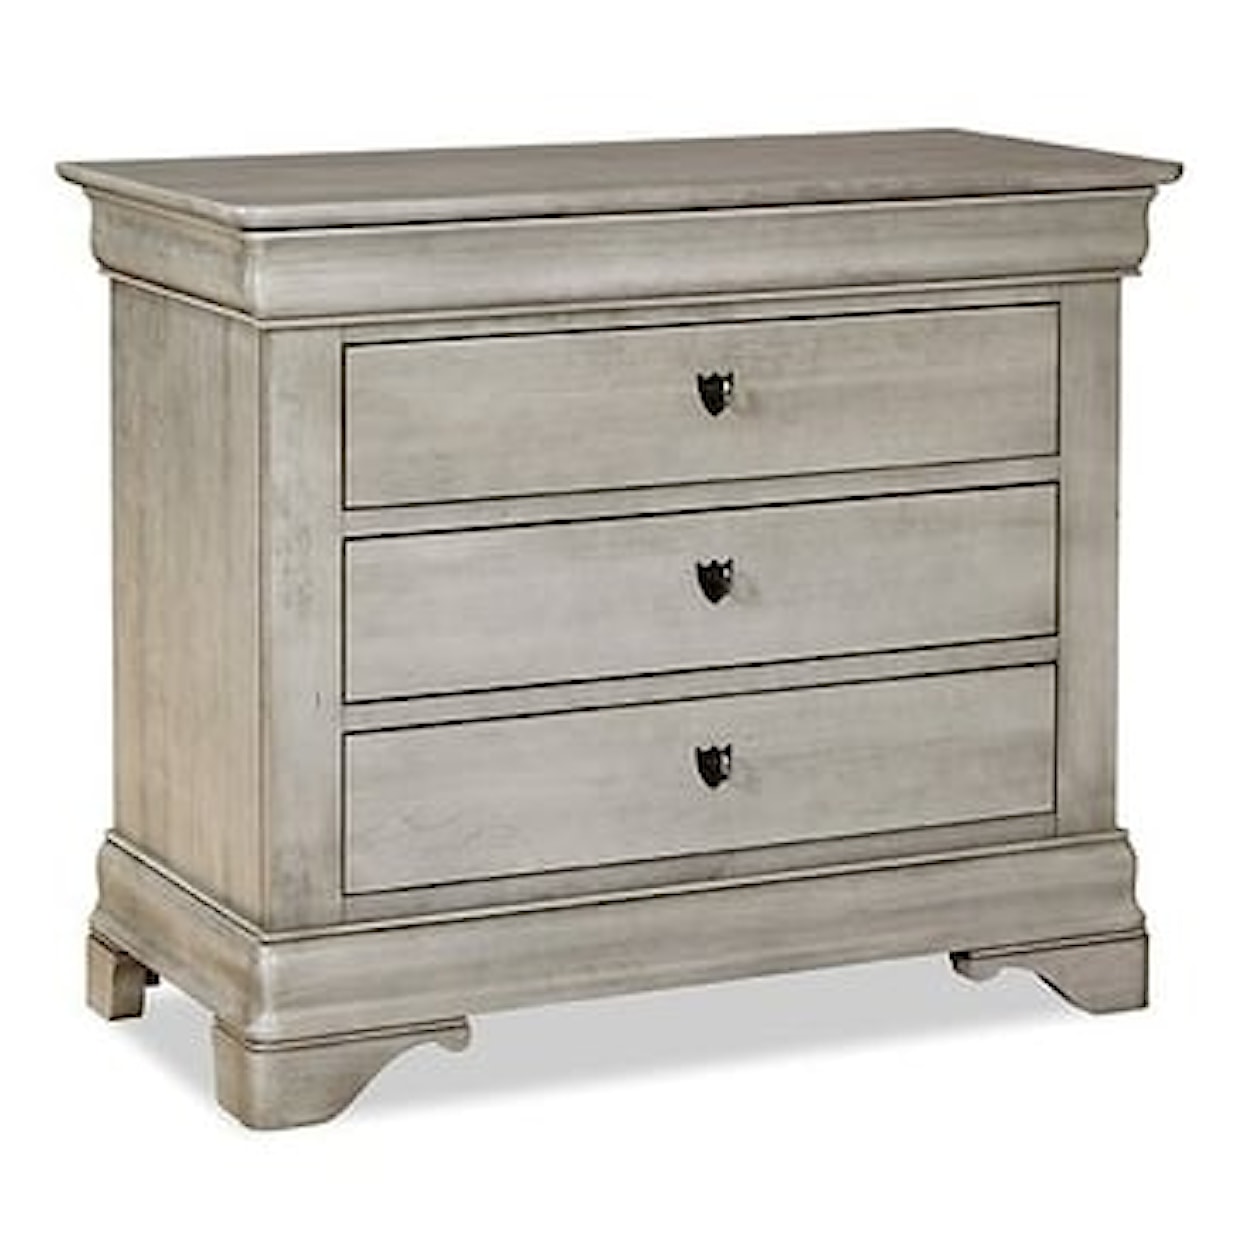 Durham Chateau Fontaine Bedside Chest